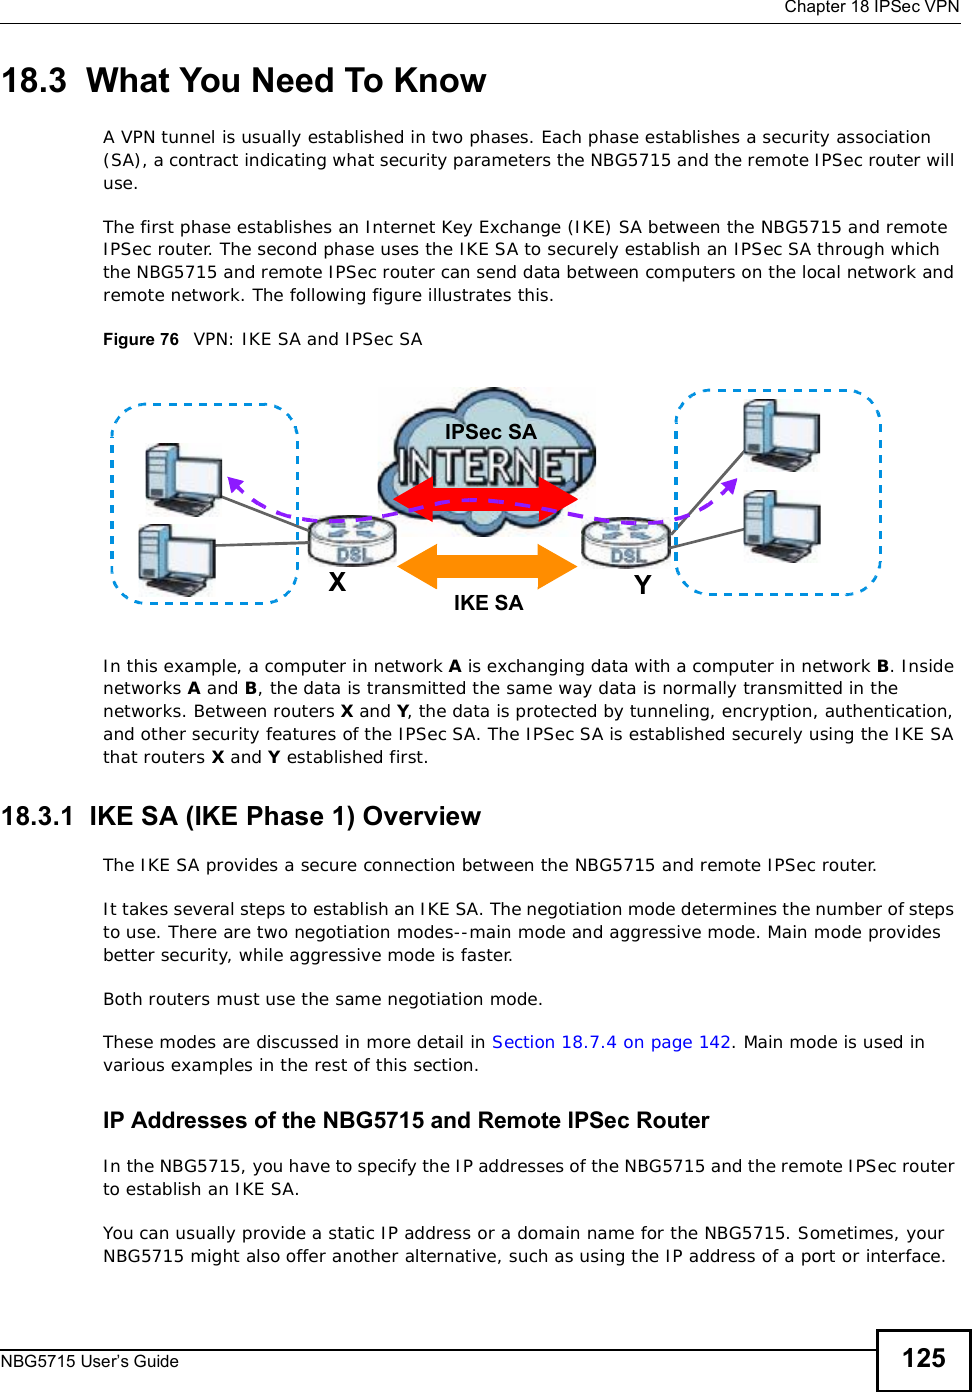  Chapter 18IPSec VPNNBG5715 User’s Guide 12518.3  What You Need To KnowA VPN tunnel is usually established in two phases. Each phase establishes a security association (SA), a contract indicating what security parameters the NBG5715 and the remote IPSec router will use.The first phase establishes an Internet Key Exchange (IKE) SA between the NBG5715 and remote IPSec router. The second phase uses the IKE SA to securely establish an IPSec SA through which the NBG5715 and remote IPSec router can send data between computers on the local network and remote network. The following figure illustrates this.Figure 76   VPN: IKE SA and IPSec SA In this example, a computer in network A is exchanging data with a computer in network B. Inside networks A and B, the data is transmitted the same way data is normally transmitted in the networks. Between routers X and Y, the data is protected by tunneling, encryption, authentication, and other security features of the IPSec SA. The IPSec SA is established securely using the IKE SA that routers X and Y established first.18.3.1  IKE SA (IKE Phase 1) OverviewThe IKE SA provides a secure connection between the NBG5715 and remote IPSec router.It takes several steps to establish an IKE SA. The negotiation mode determines the number of steps to use. There are two negotiation modes--main mode and aggressive mode. Main mode provides better security, while aggressive mode is faster.Both routers must use the same negotiation mode.These modes are discussed in more detail in Section 18.7.4 on page 142. Main mode is used in various examples in the rest of this section.IP Addresses of the NBG5715 and Remote IPSec RouterIn the NBG5715, you have to specify the IP addresses of the NBG5715 and the remote IPSec router to establish an IKE SA.You can usually provide a static IP address or a domain name for the NBG5715. Sometimes, your NBG5715 might also offer another alternative, such as using the IP address of a port or interface.XYIPSec SAIKE SA